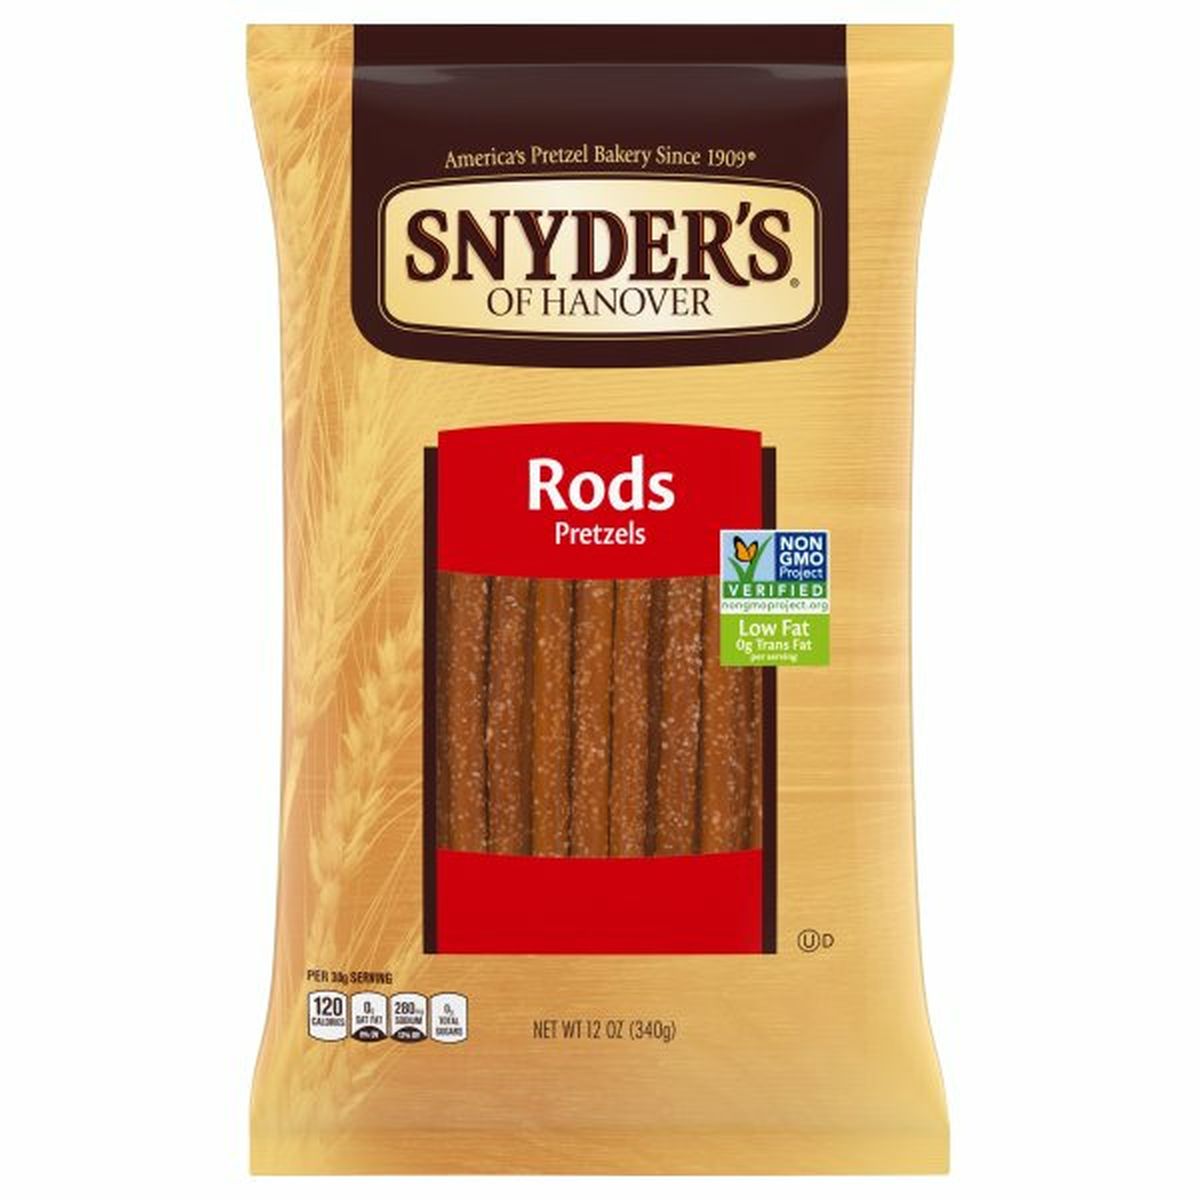 Calories in Snyder's of Hanovers Pretzels, Rods